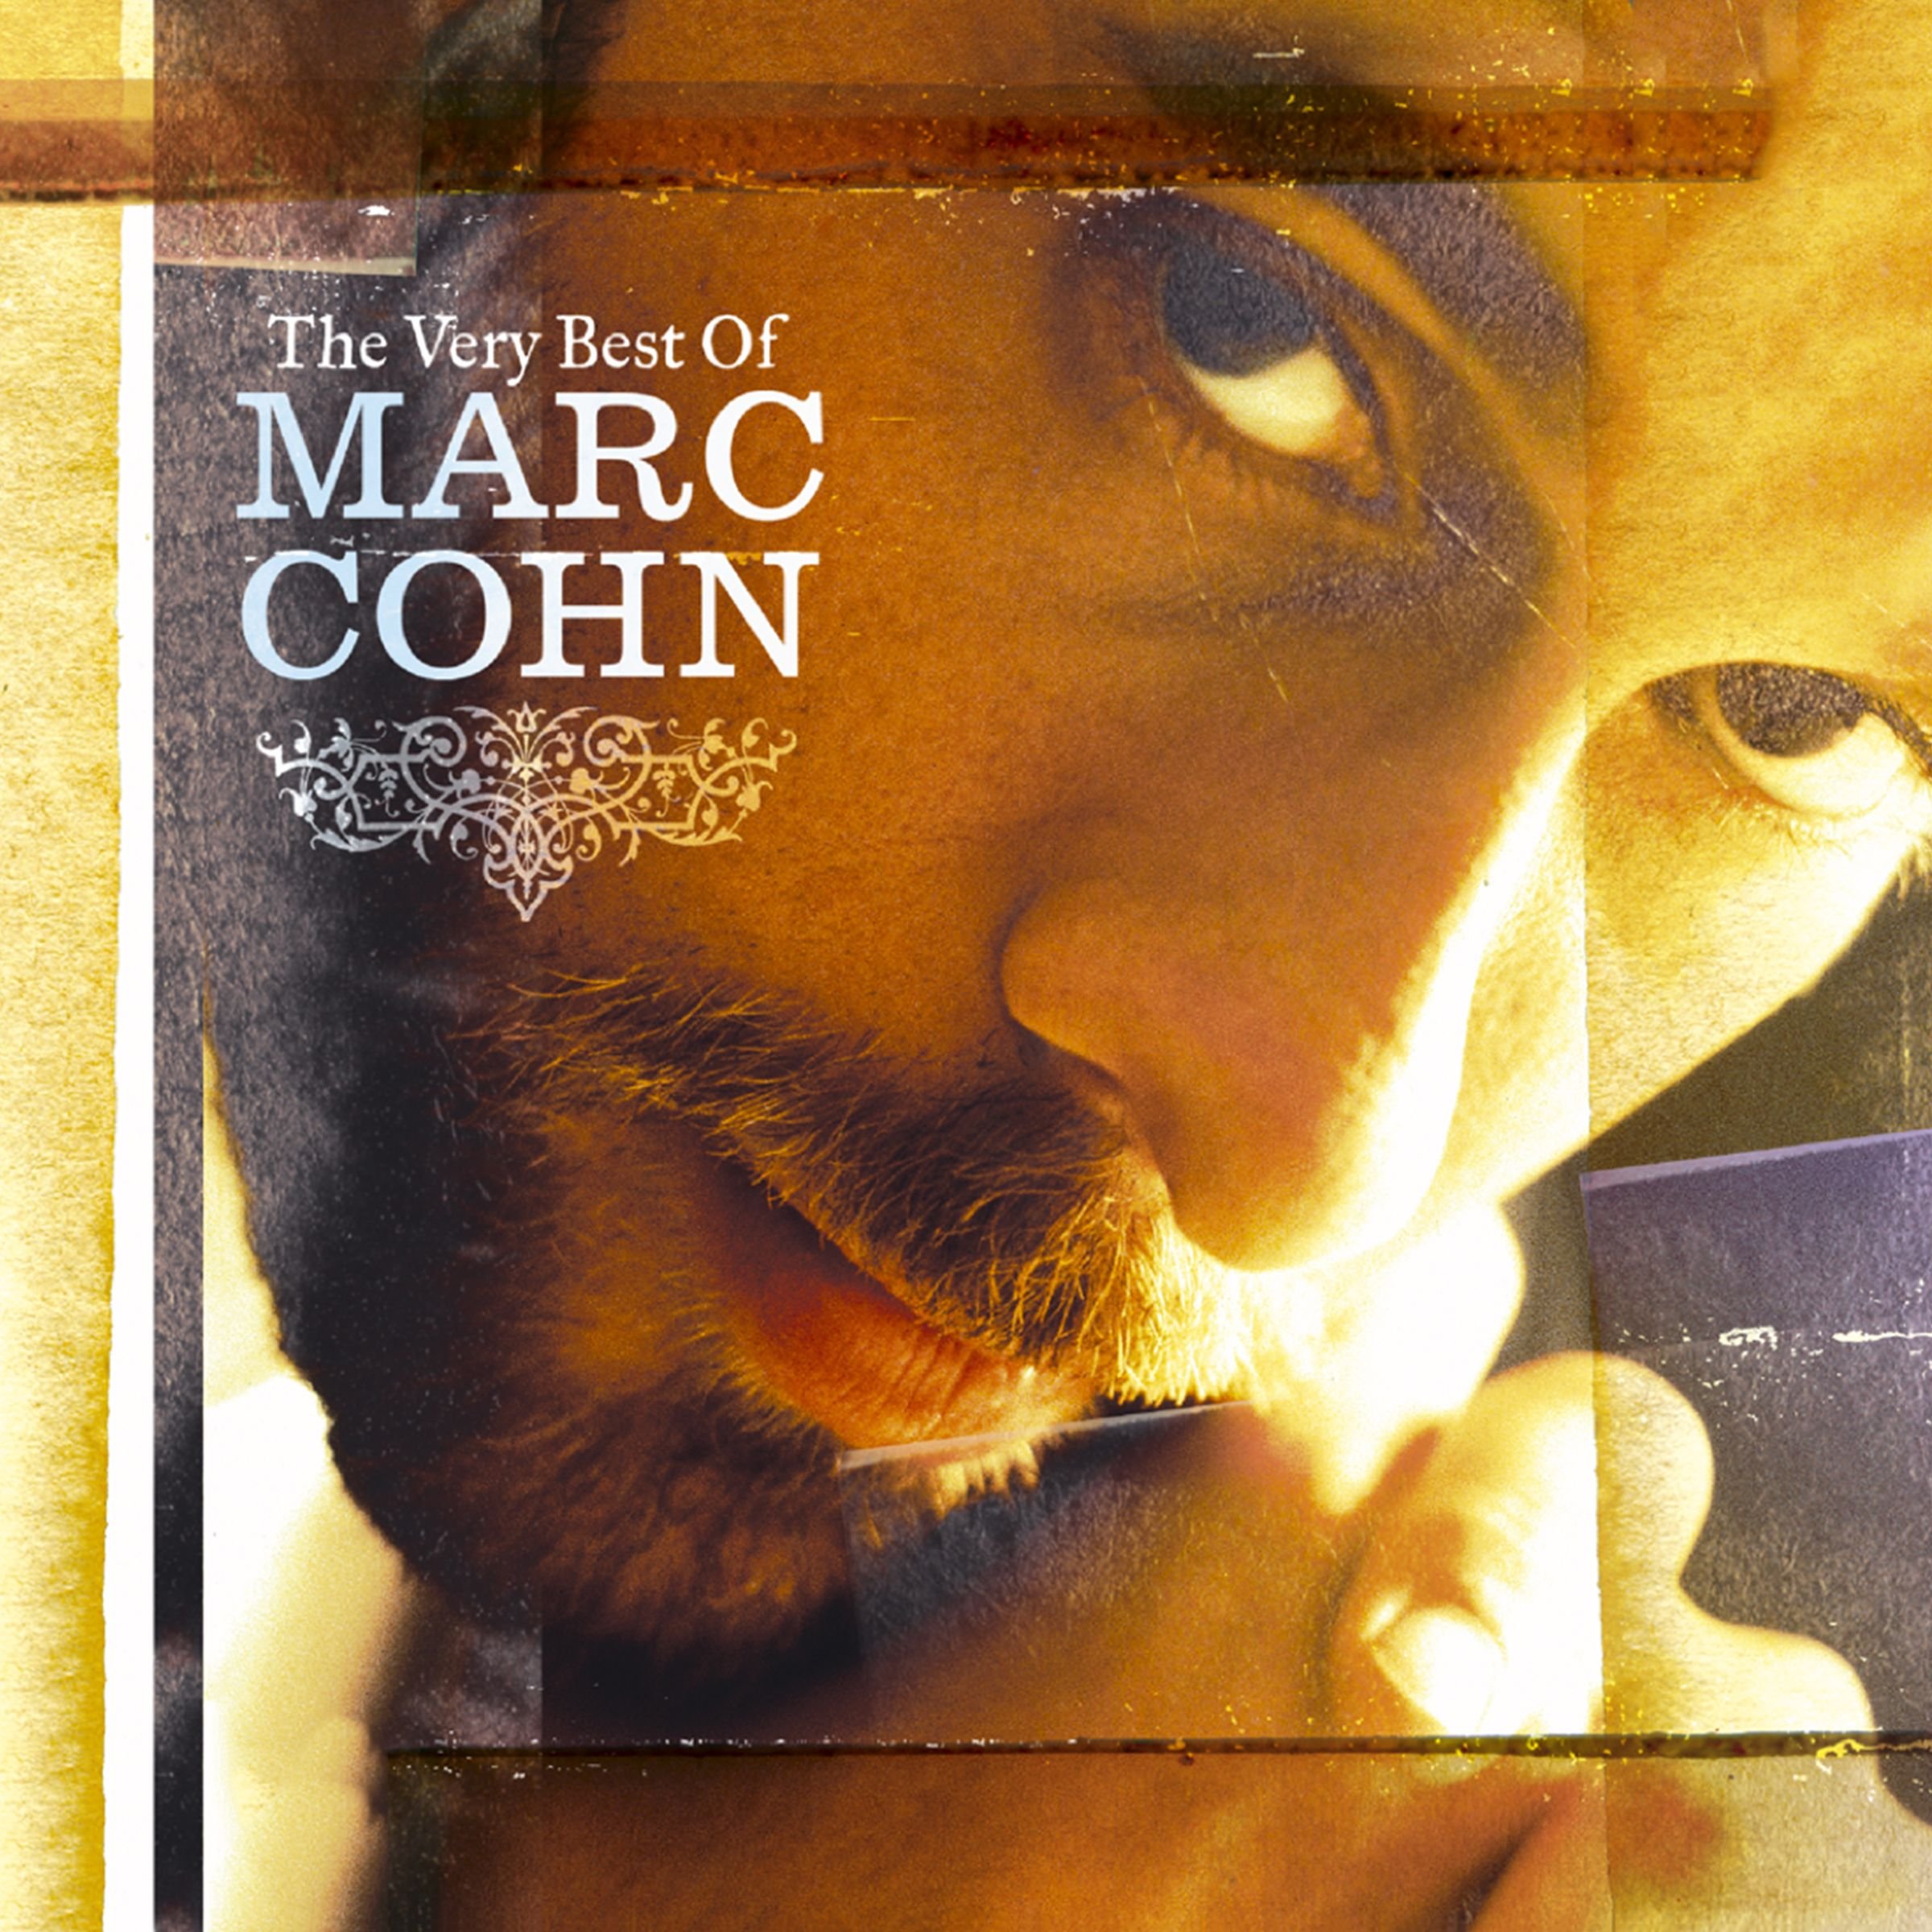 Marc Cohn - The Very Best of Marc Cohn (2006) FLAC Download